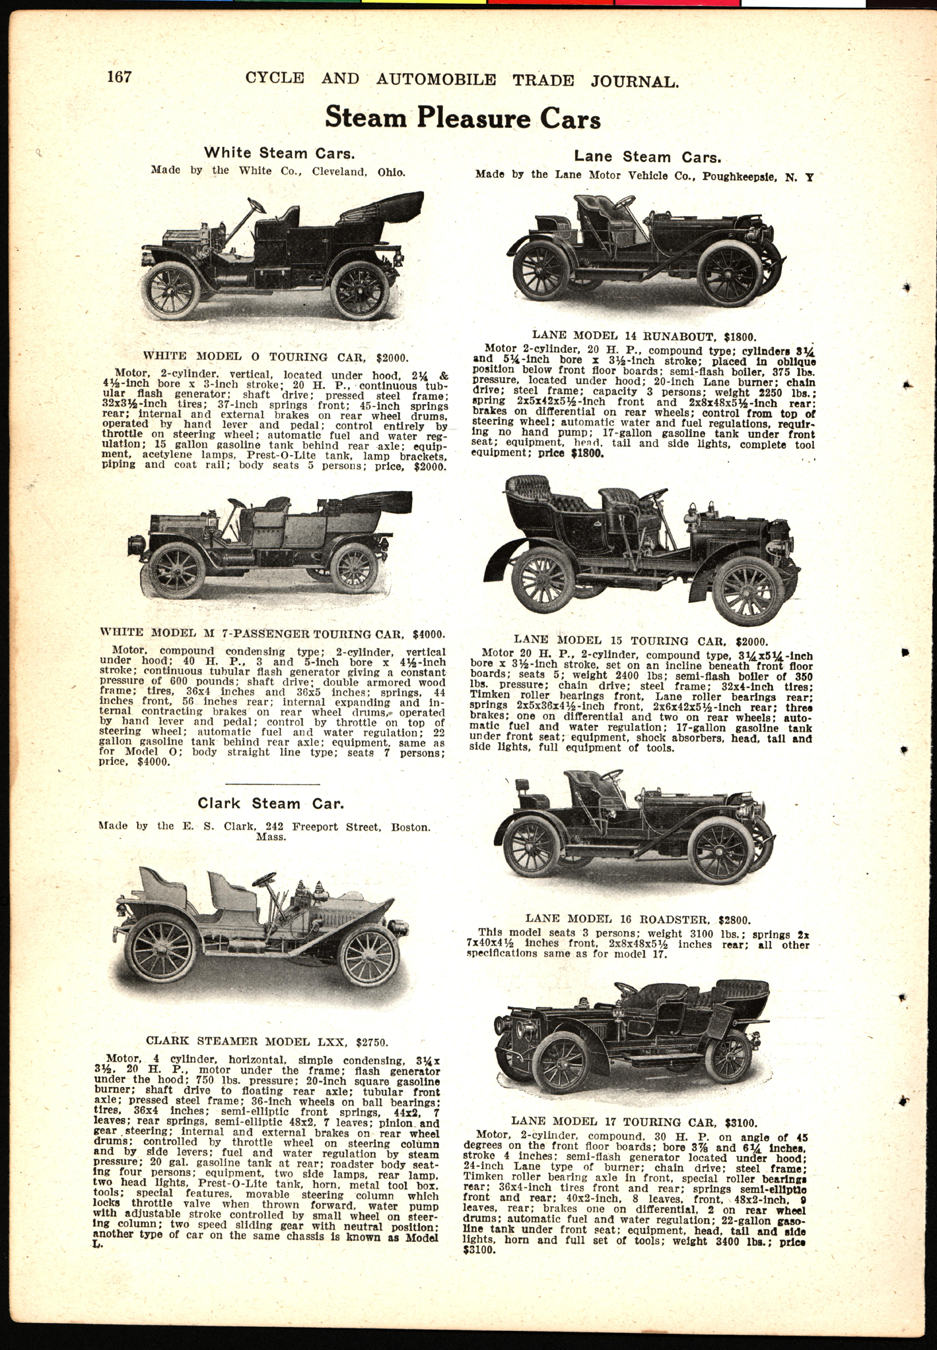 Edward S. Clark, Cycle & Automobile Trade Journal, 1909